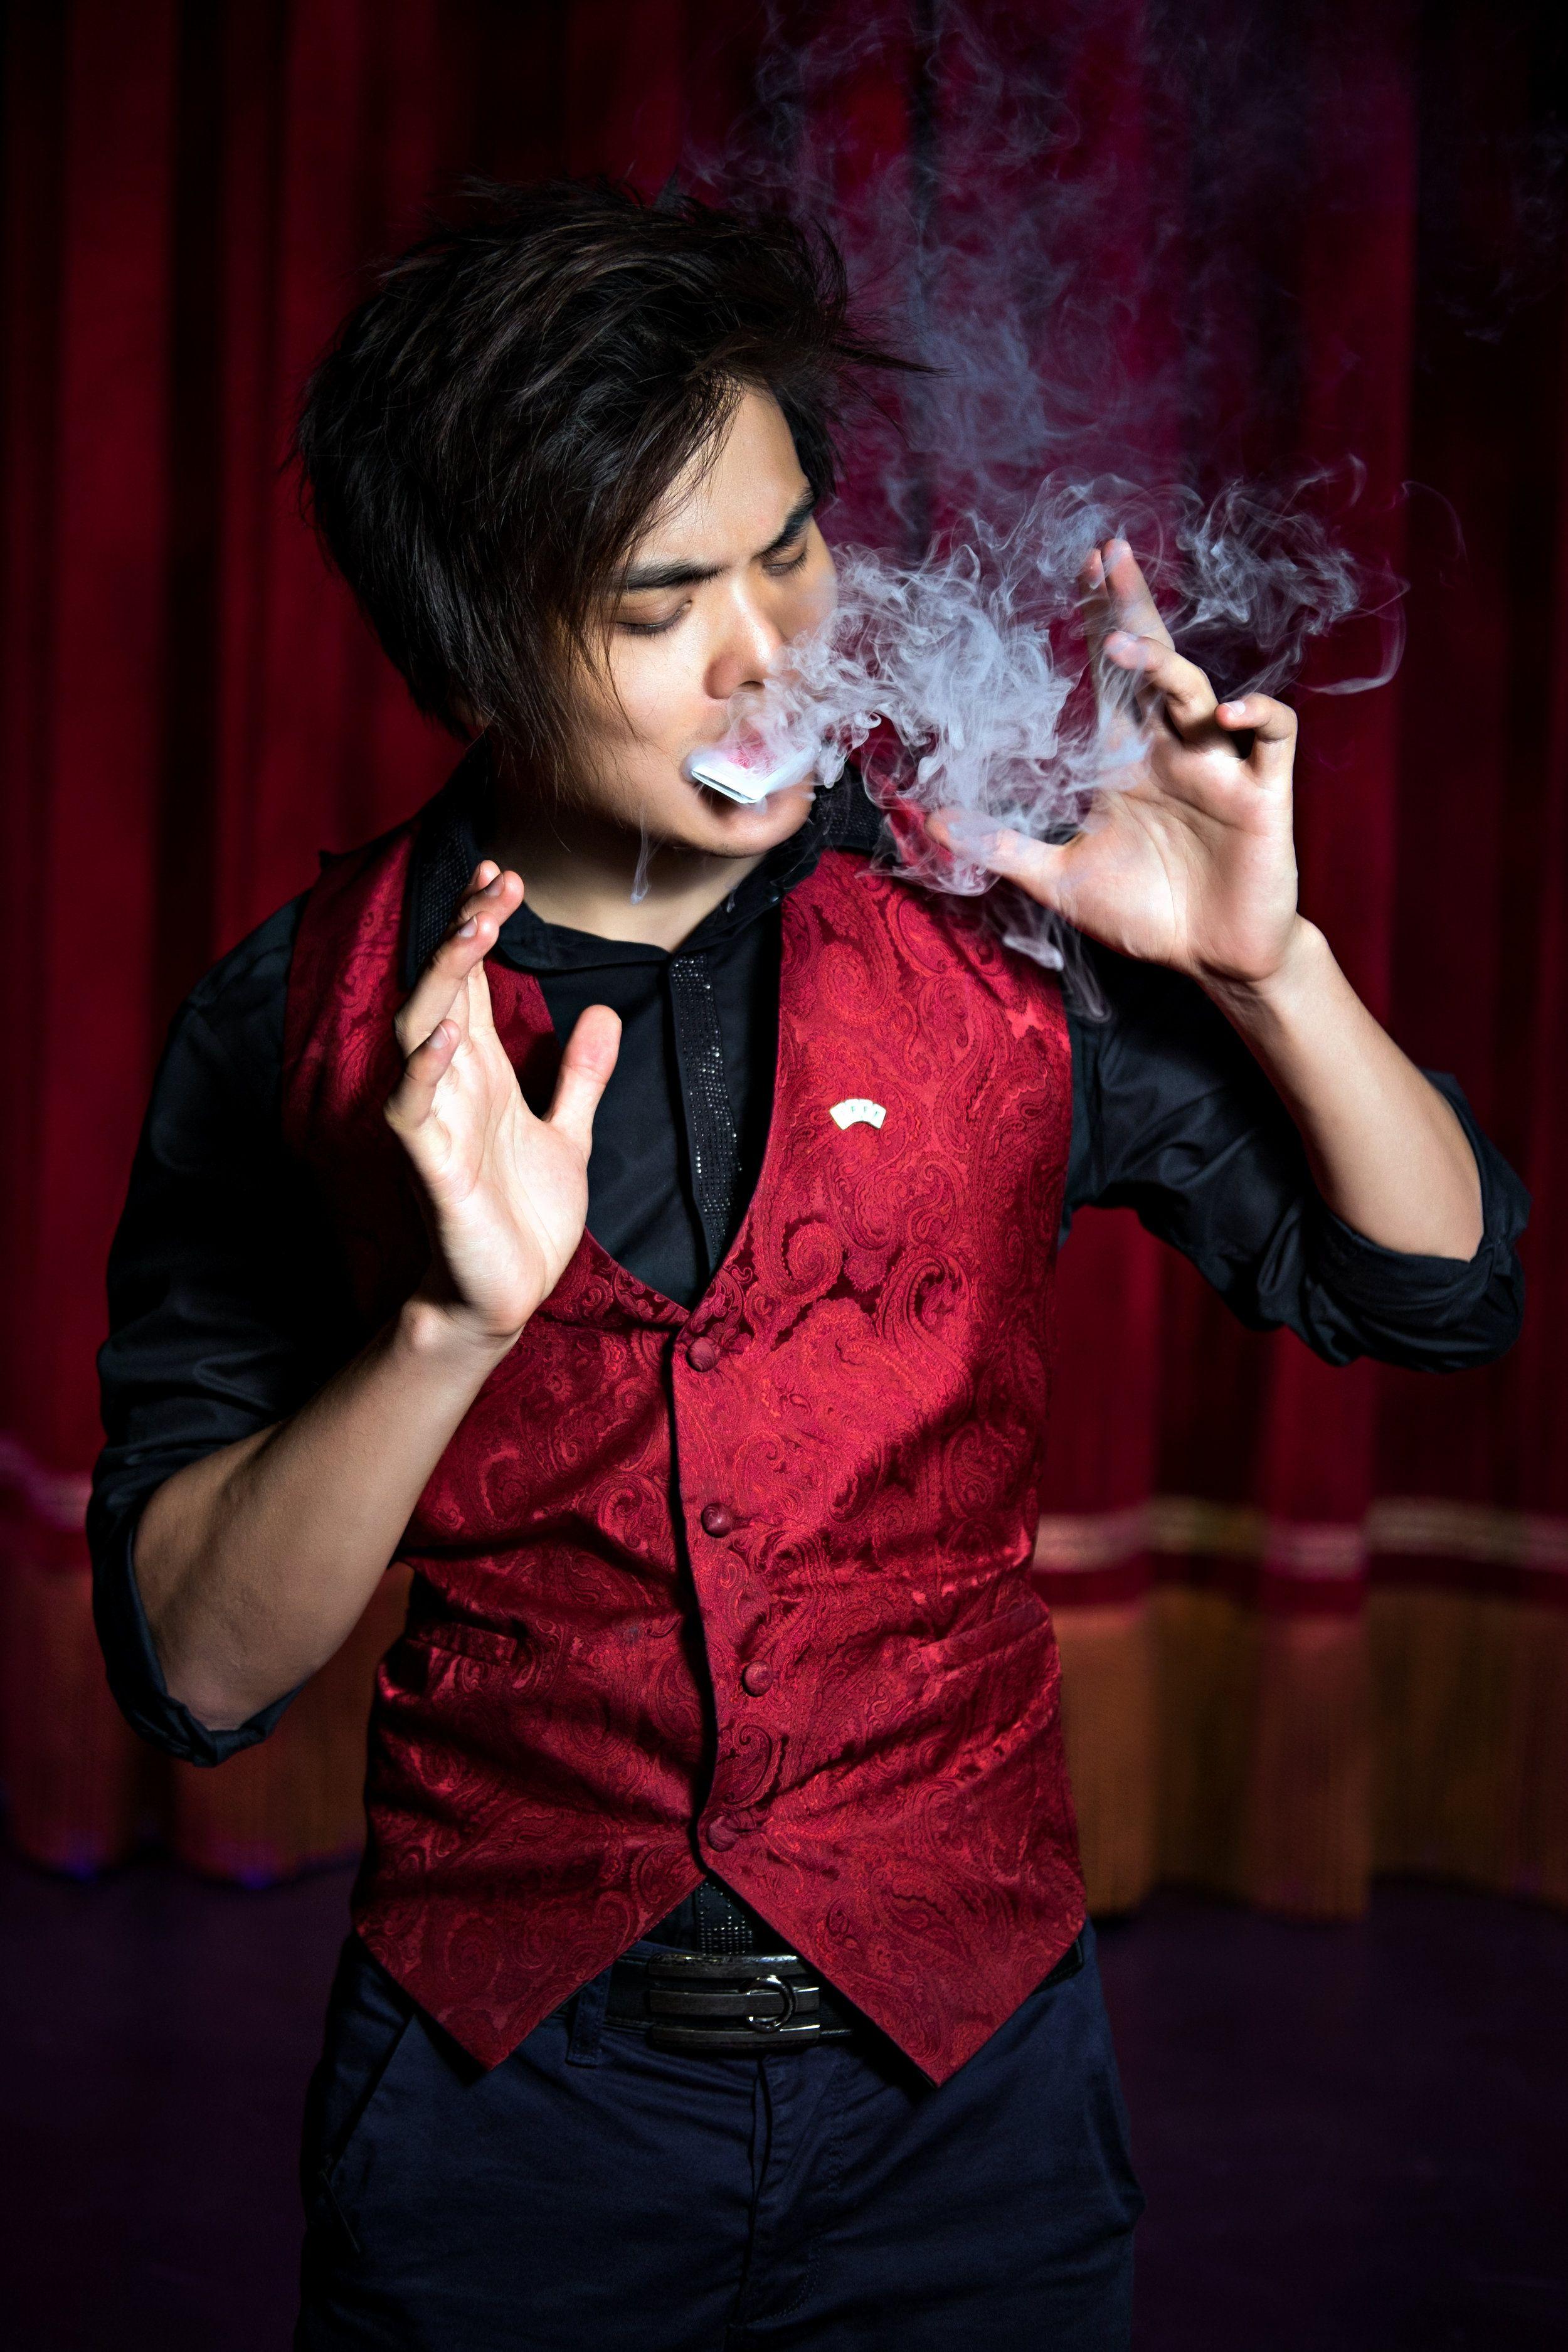 Shin Lim Magic. Welcome To The Art of Illusion